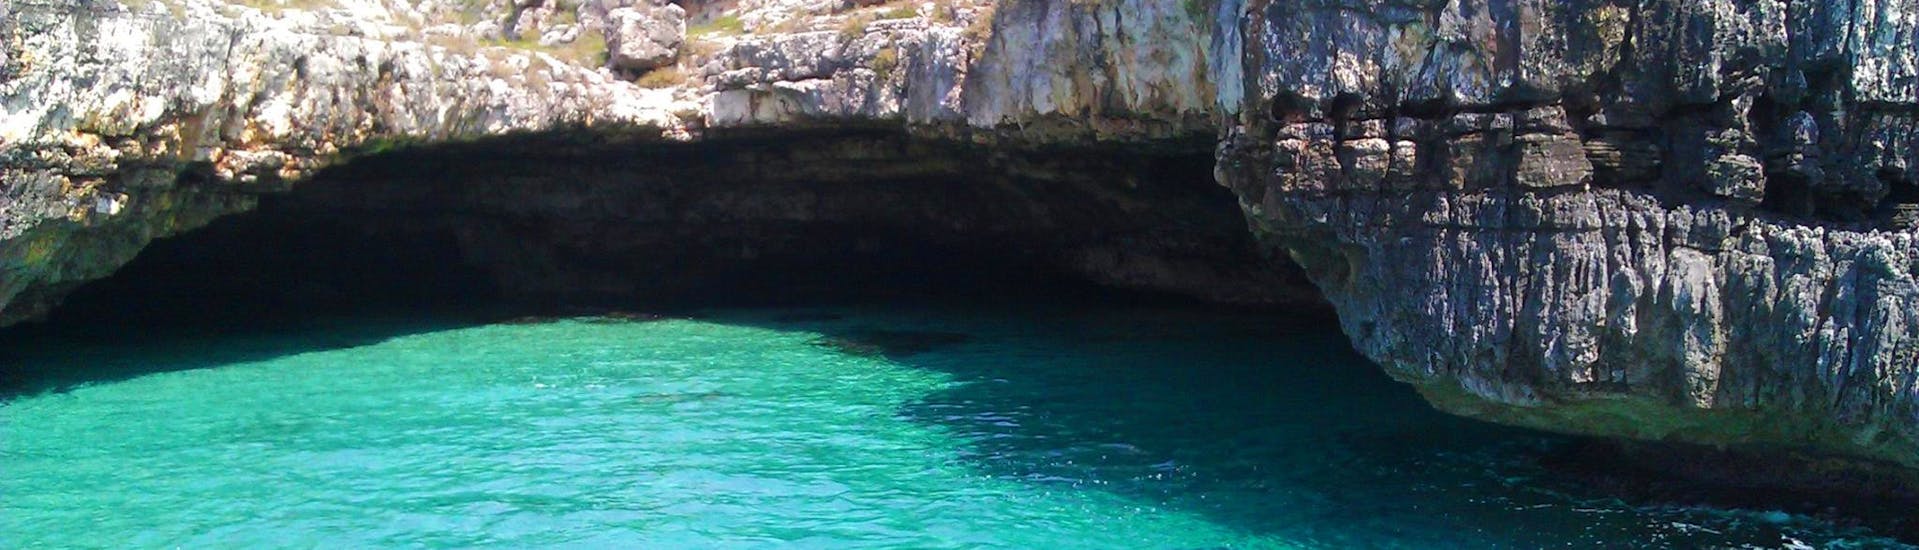 One of the caves you can visit with a RIB boat rental in Torre Vado (up to 16 people) with Escursioni La Torre.